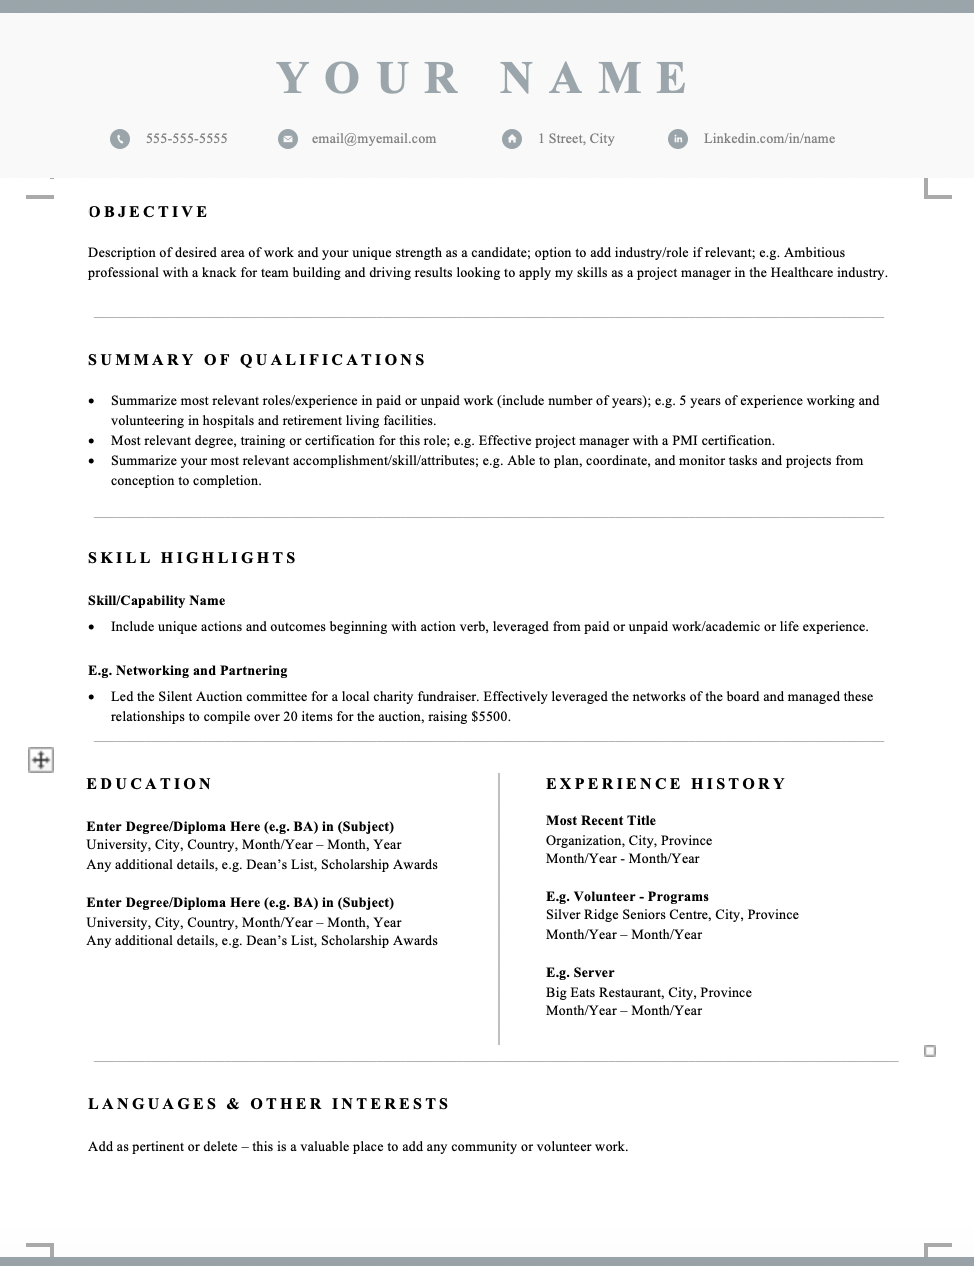 Resume Format For Job In Canada / Writing an effective resume for job